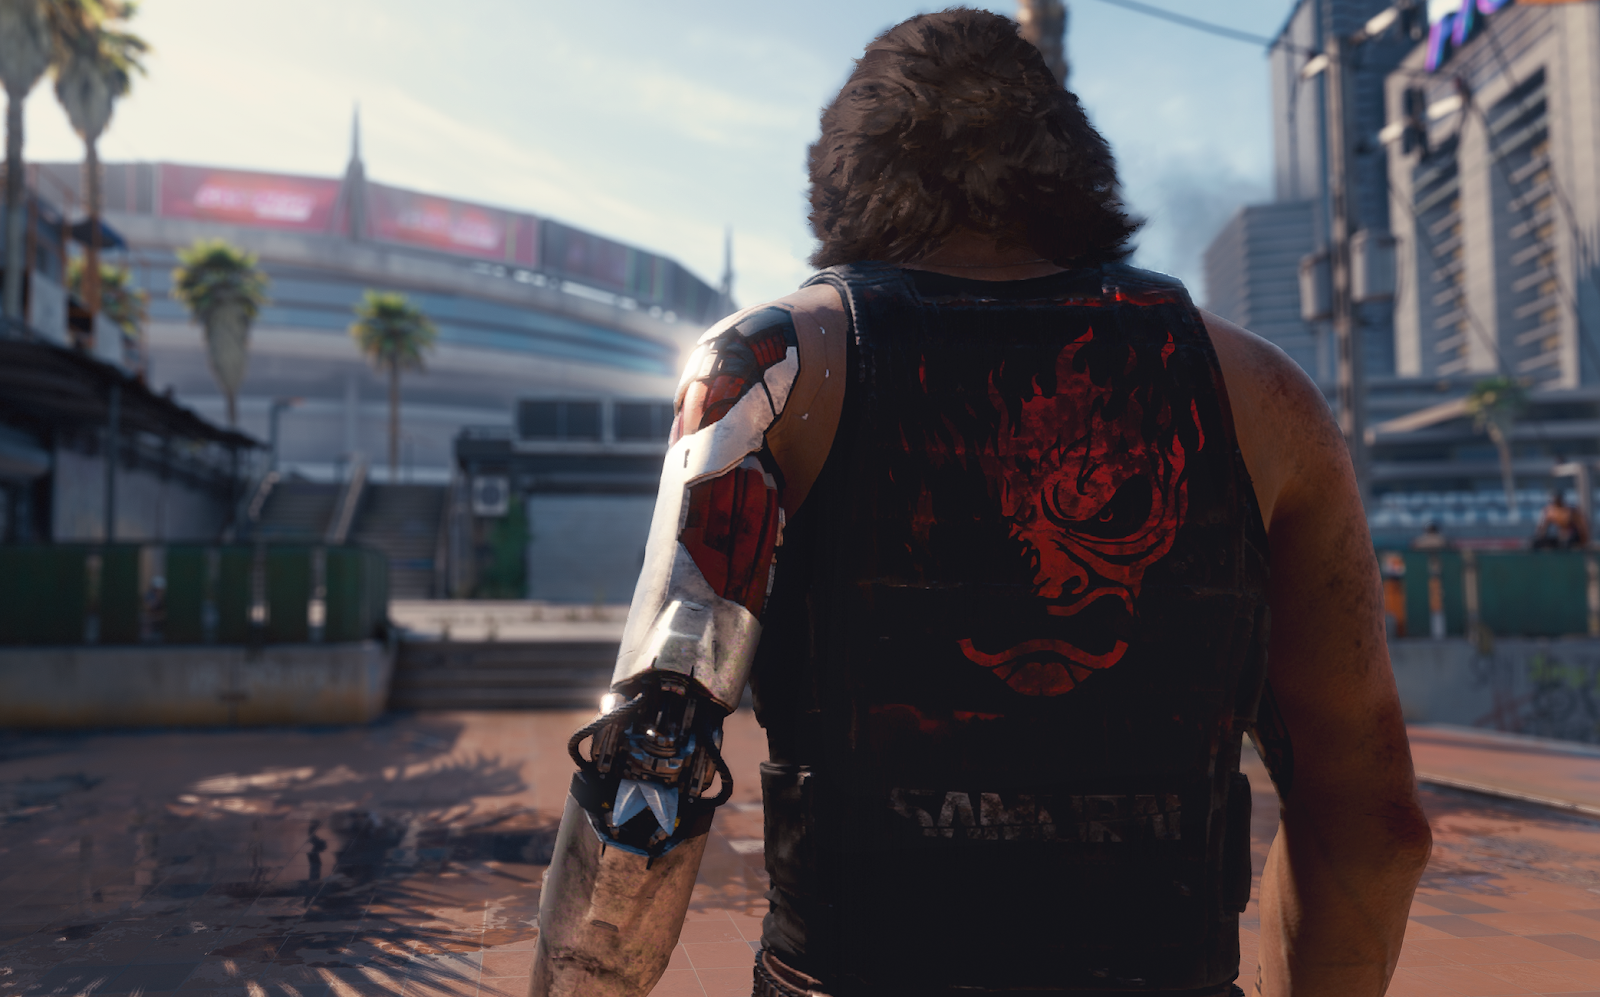 Cyberpunk 2077 Artist Says Controversial In-Game Image Is Commentary On Corporations